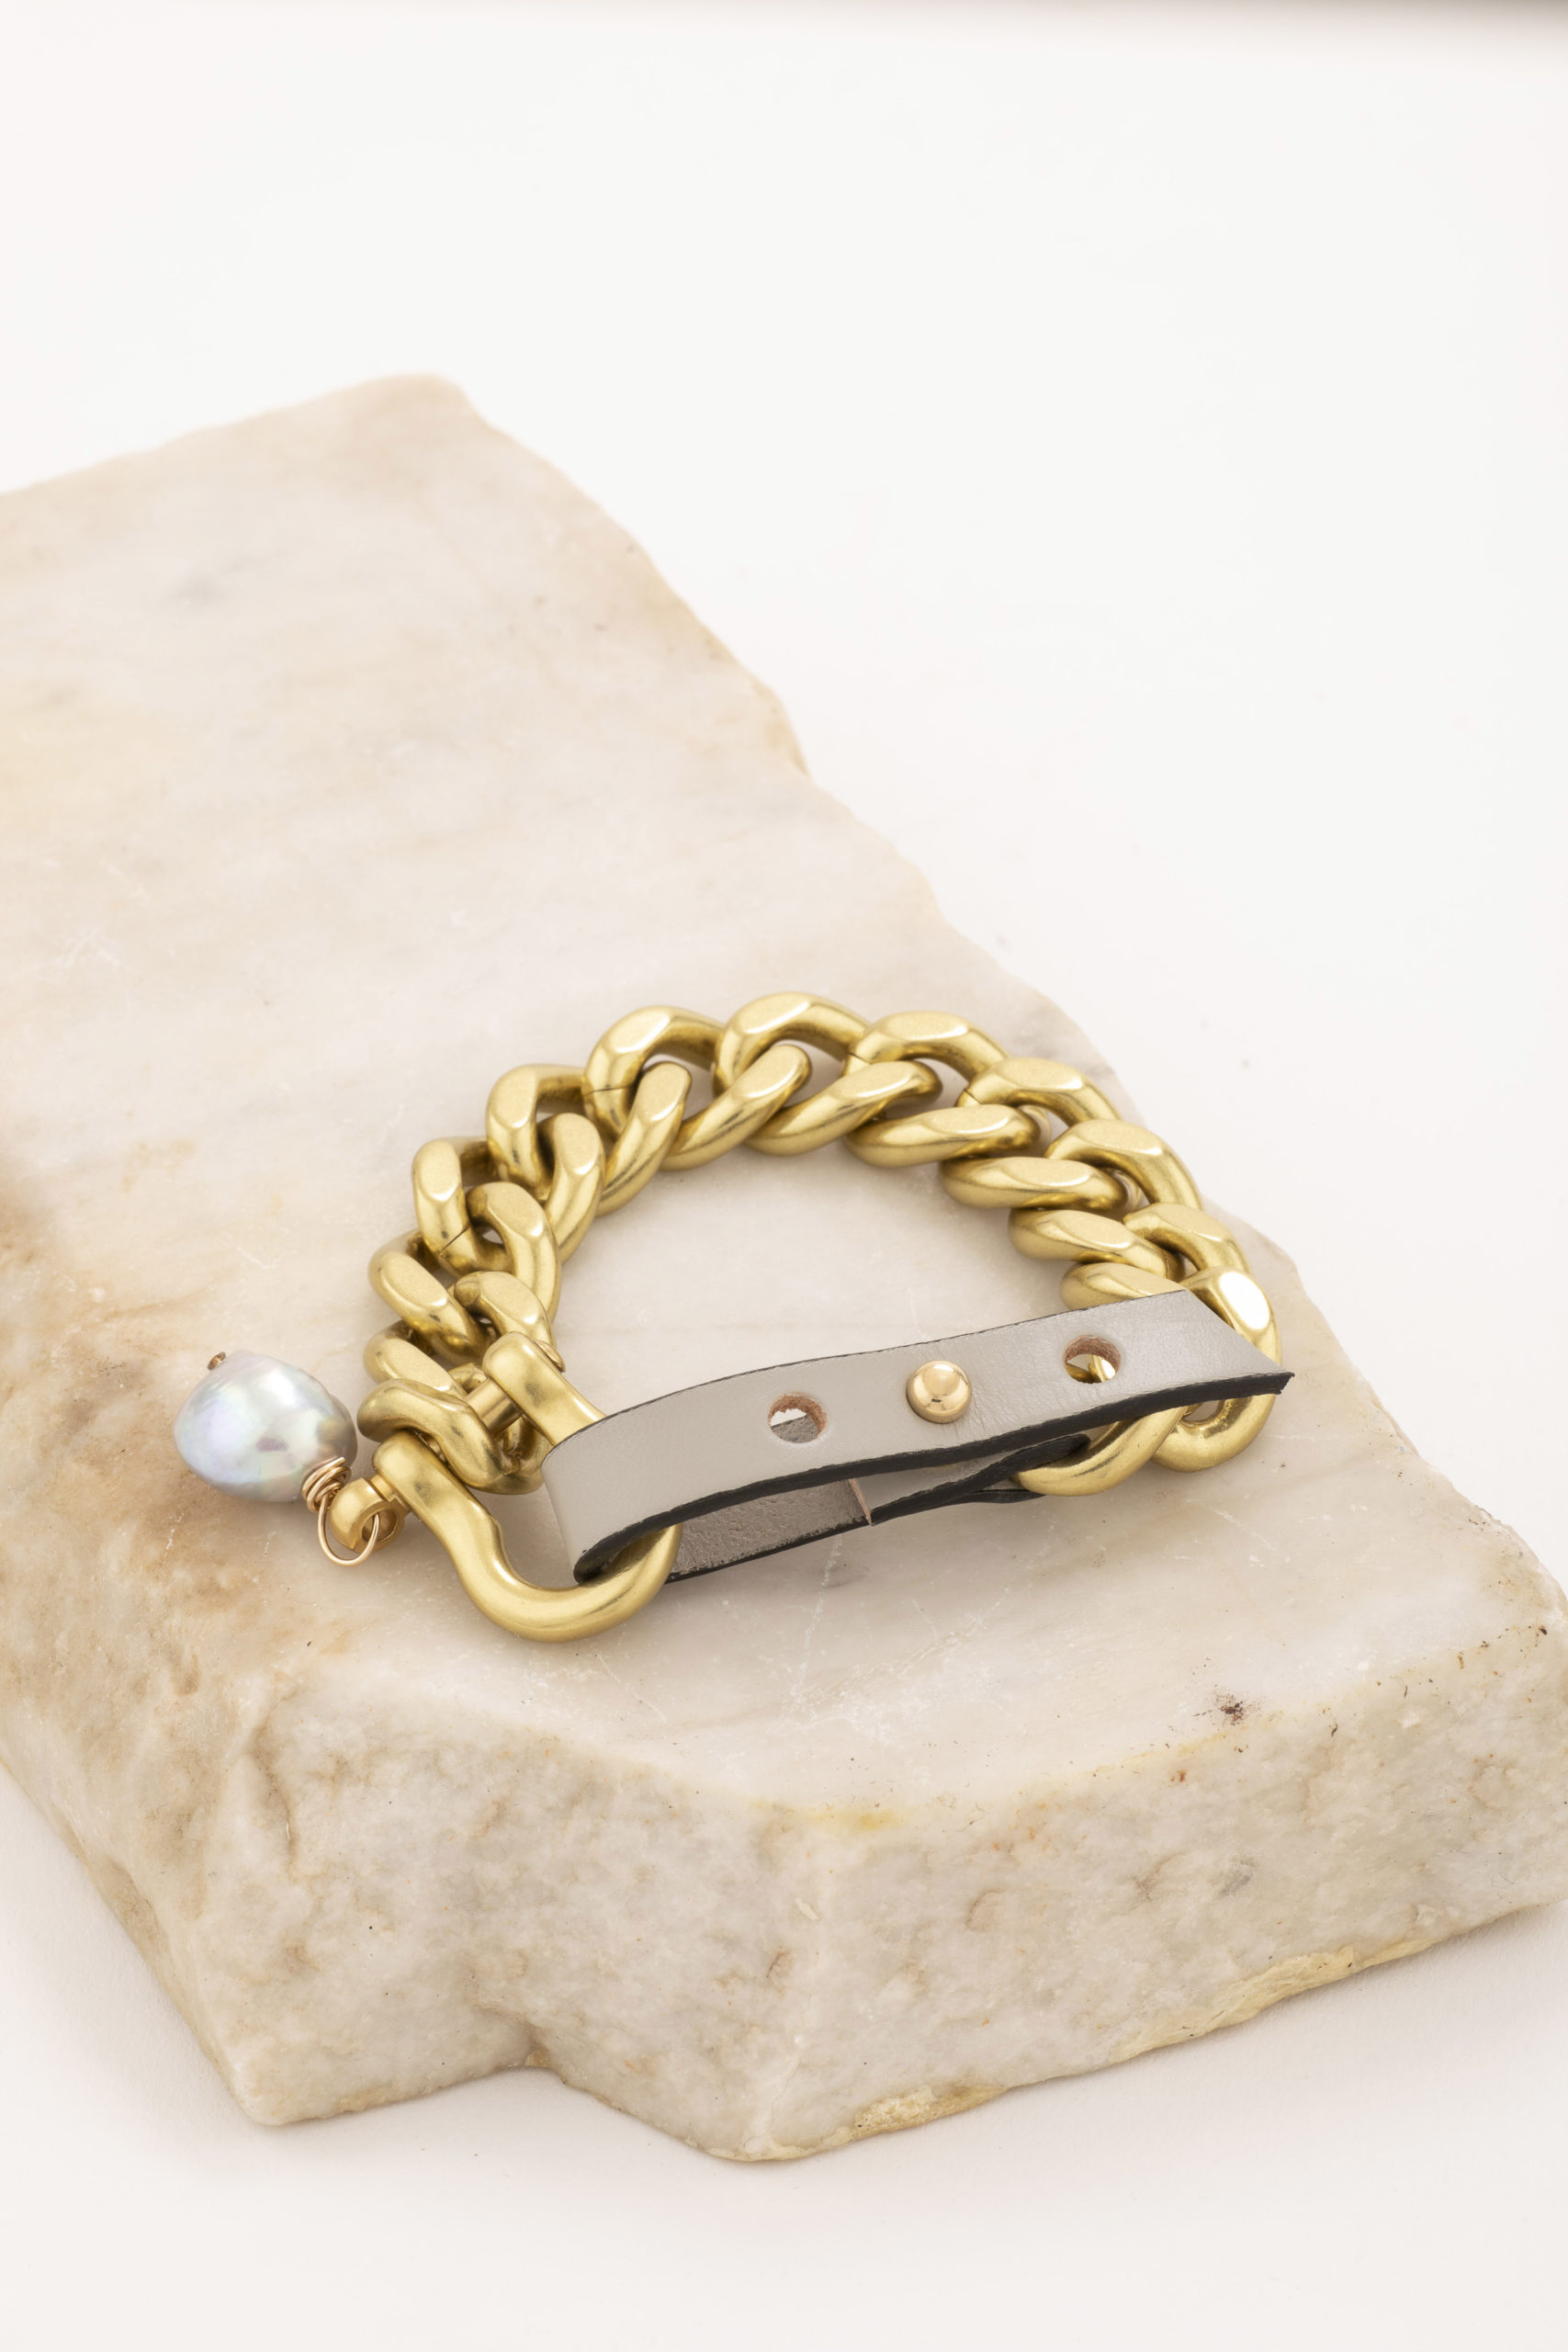 Featured image for “Rory Brass Bracelet”